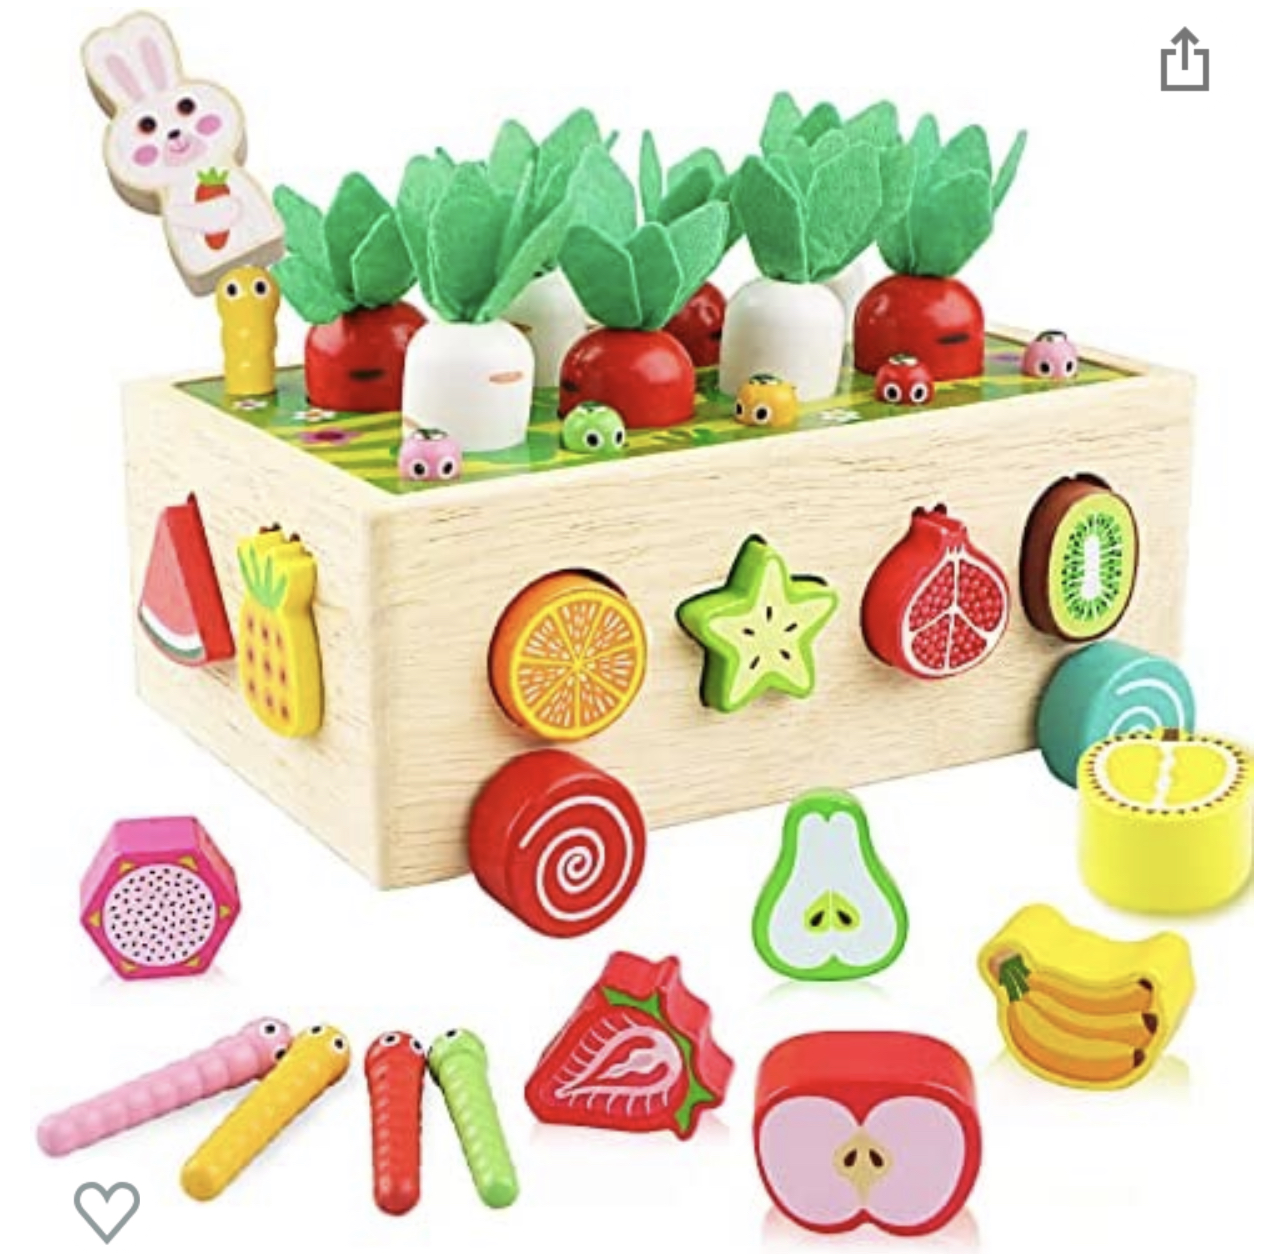 Montessori Toys for 1 Year Old, Toys for Girls 2 Year Old Girl Birthday Gift, Educational Toys for 1 Year Old 2 Year Old Toys, Carrot Toys for 1 + Year Old Girl Wooden Toys for 1 + Year Old